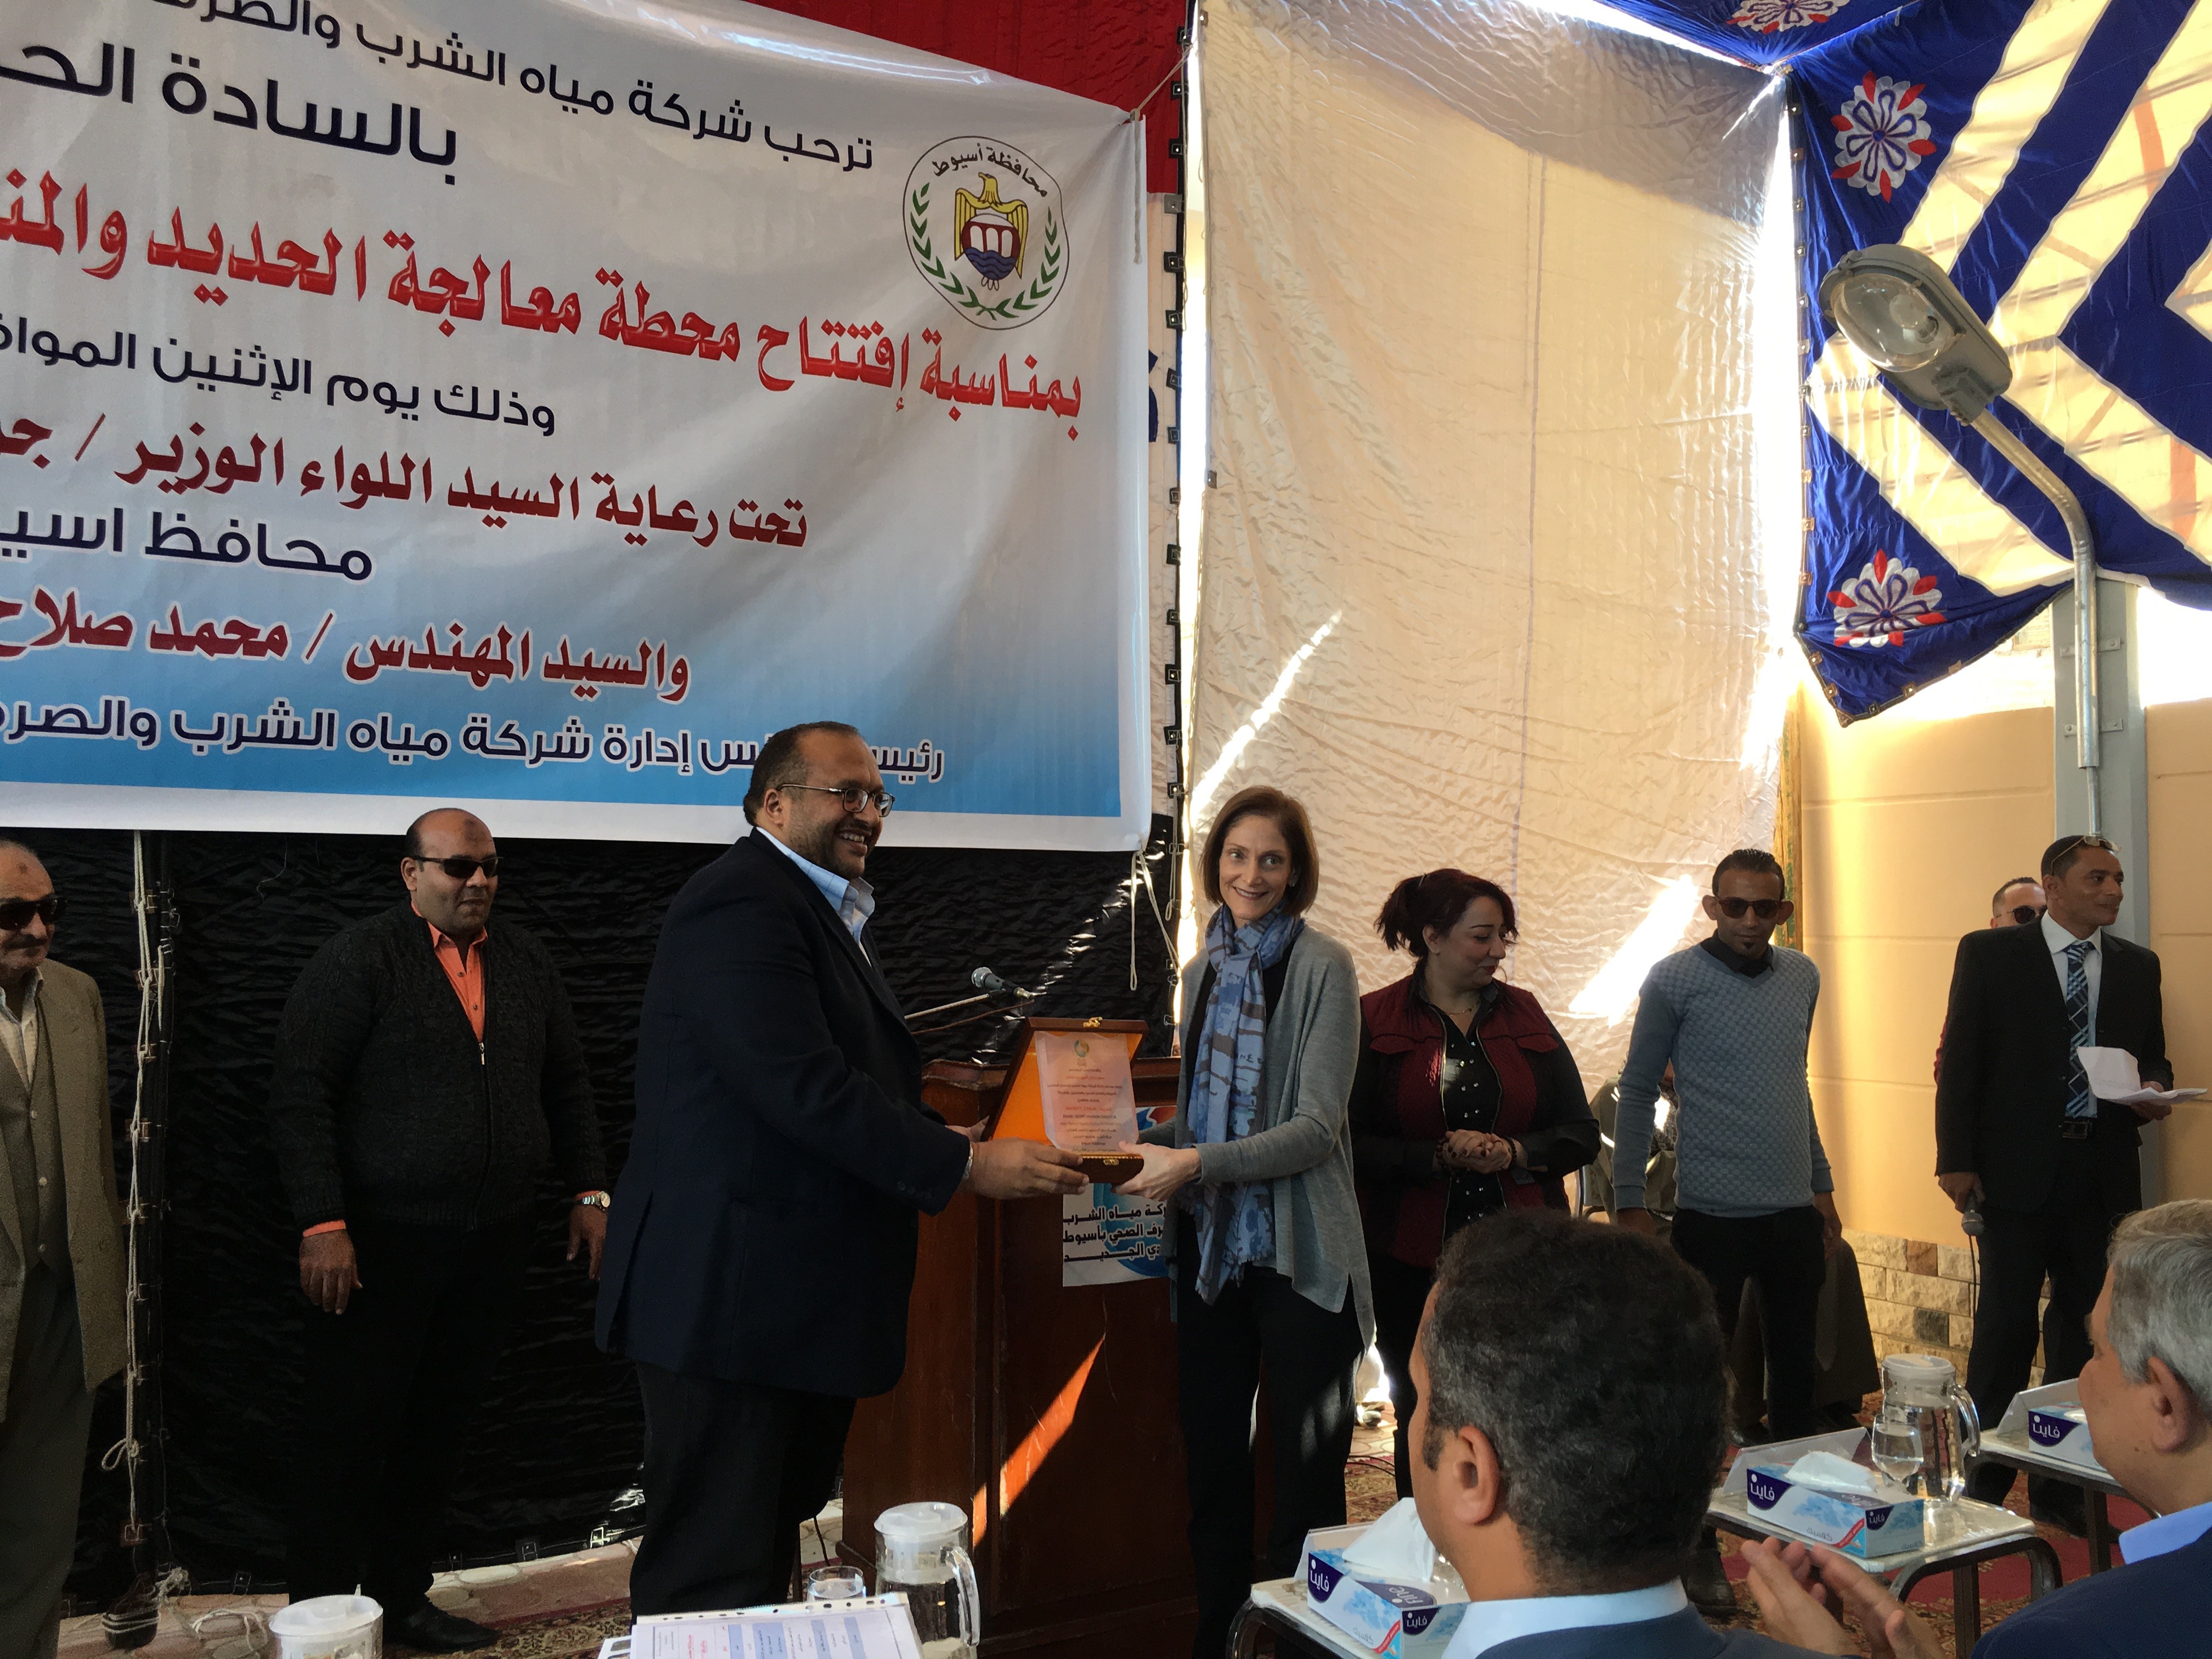 USAID Mission Director Sherry Carlin and Assiut Water Company Chairman Mohamed Salah